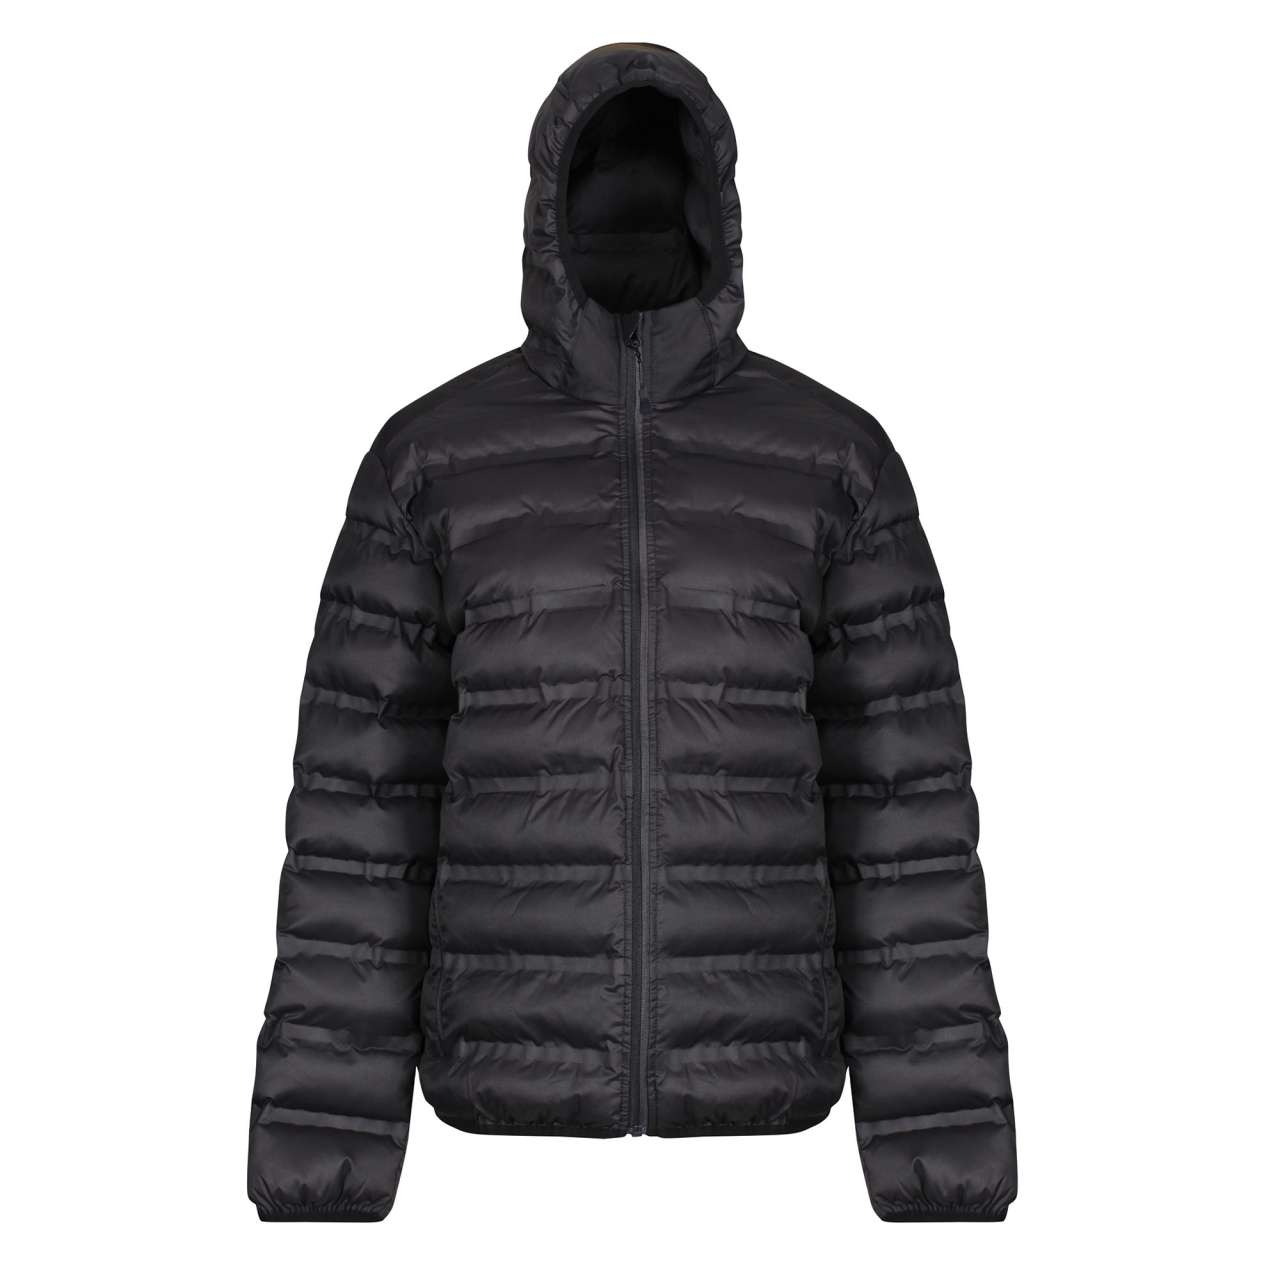 X-PRO ICEFALL III PERFORMANCE INSULATED SEAMLESS QUILT JACKET